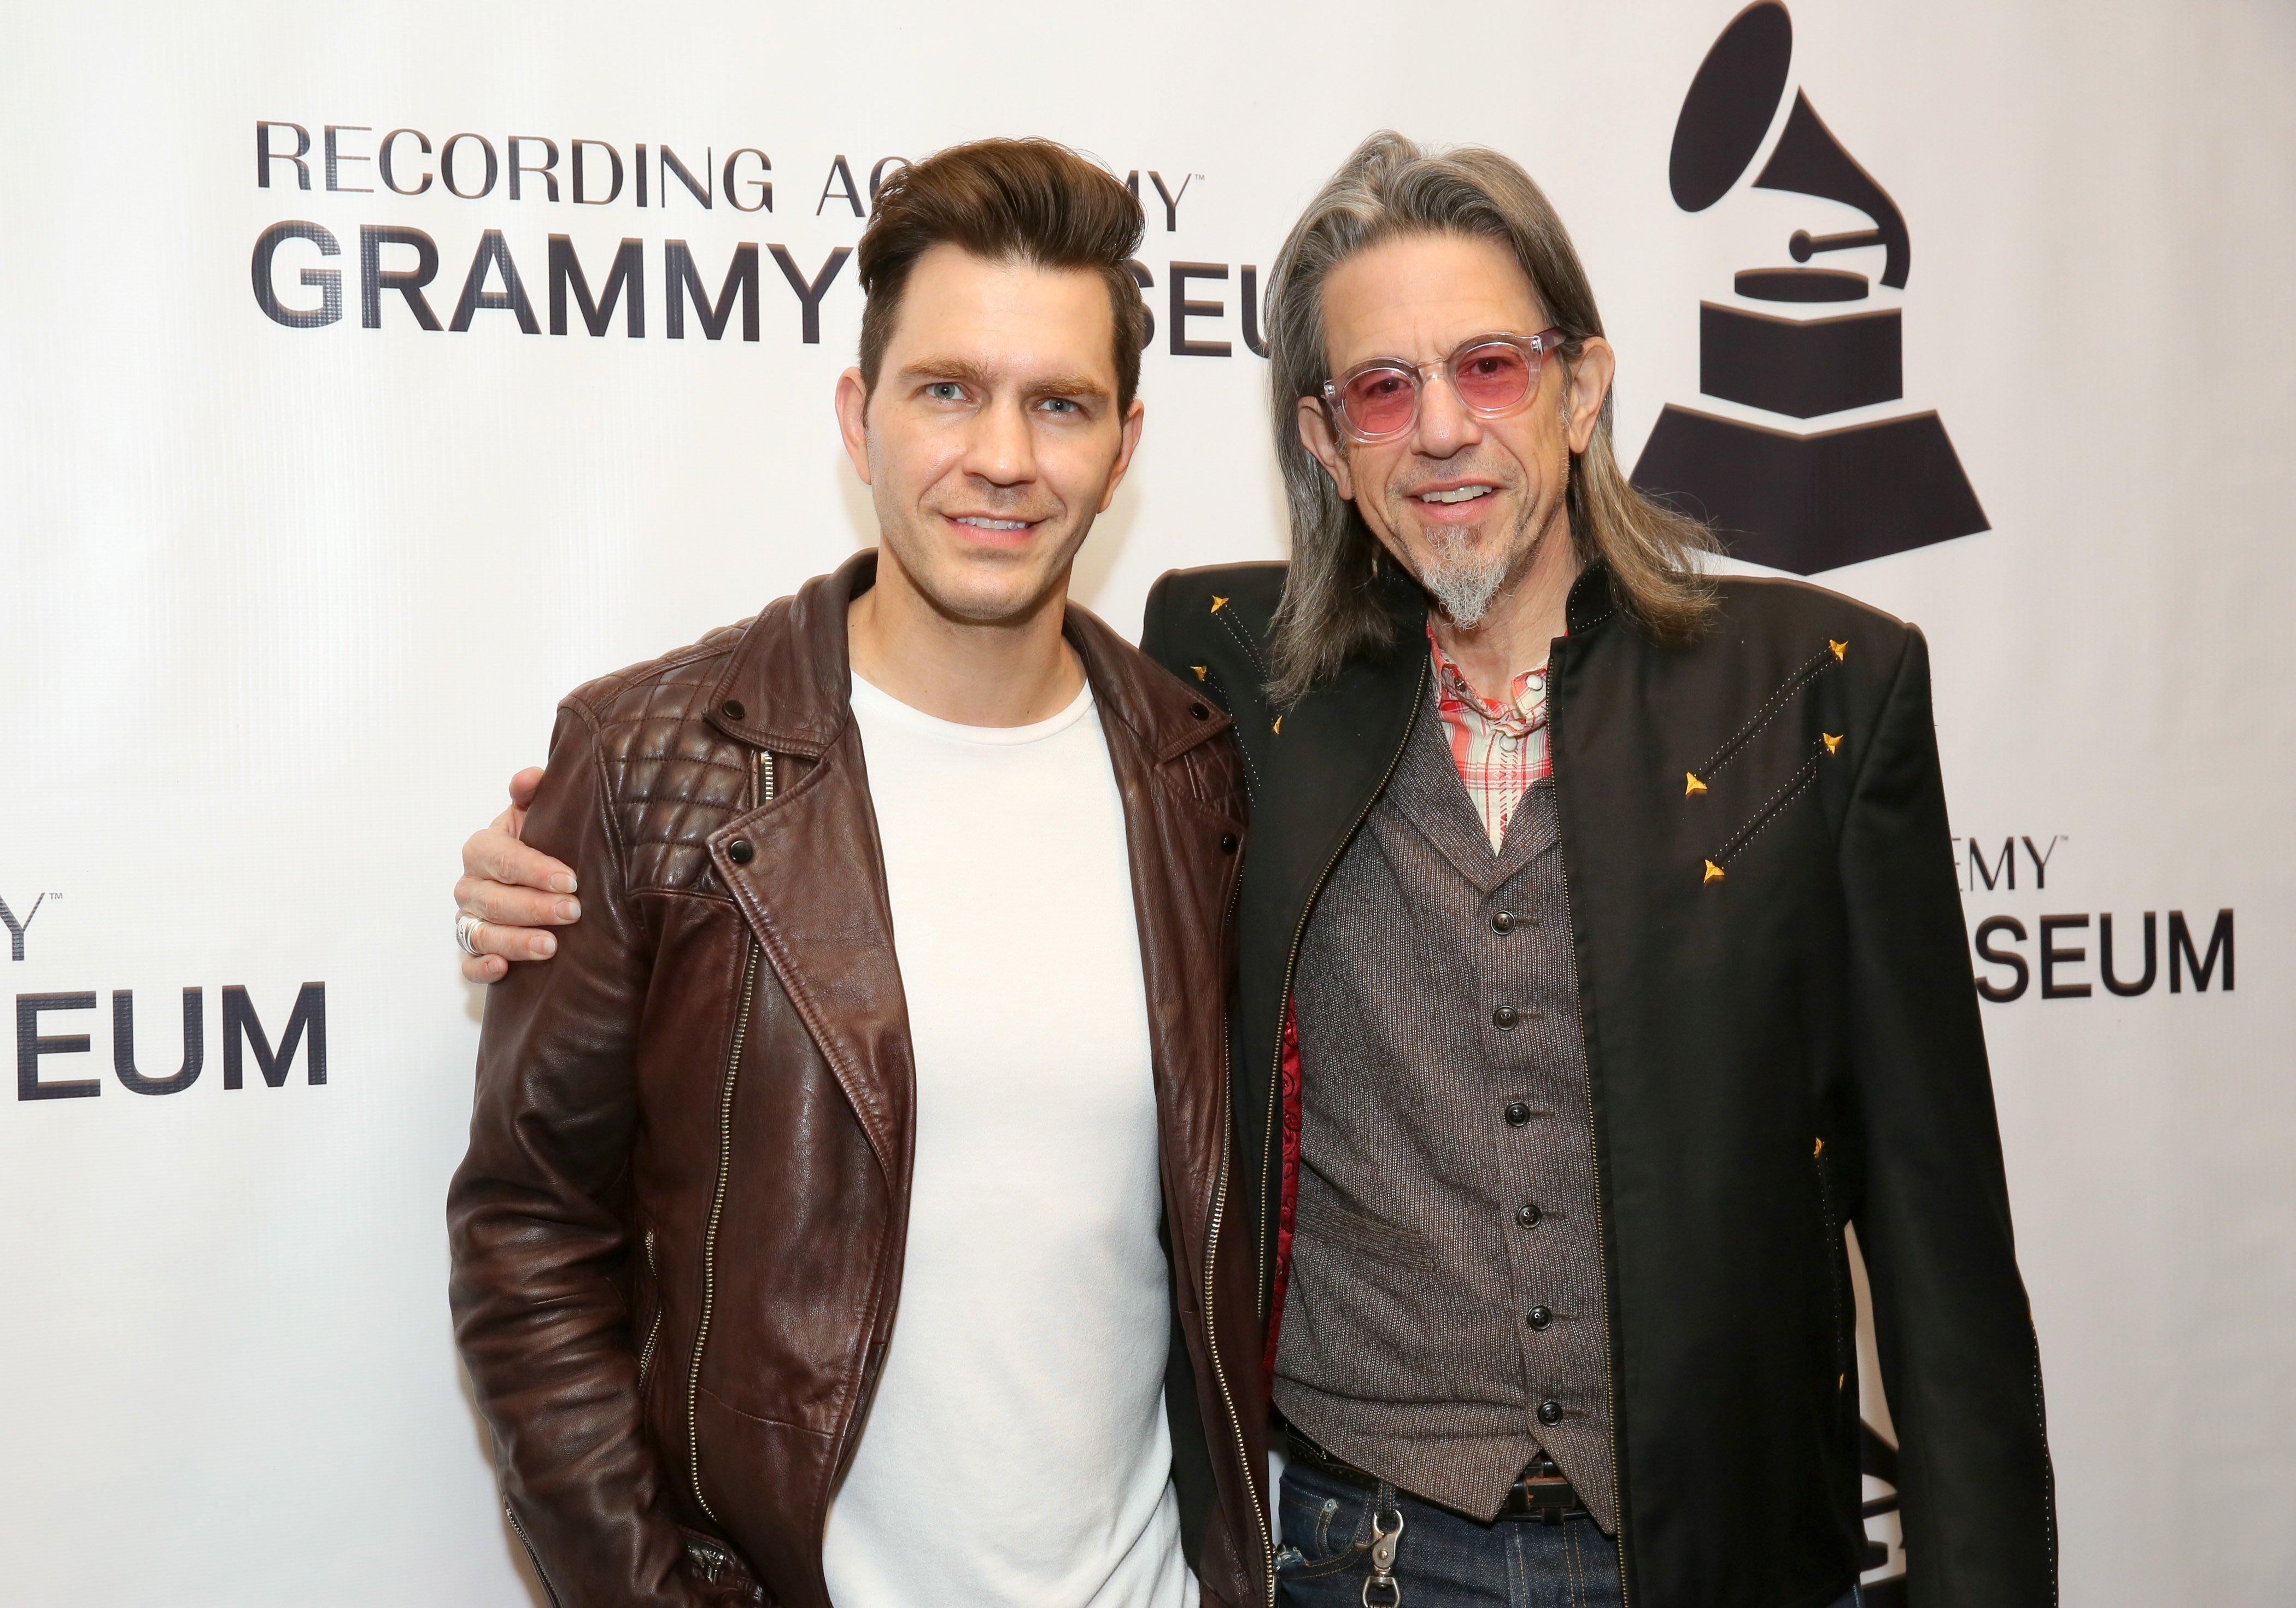 Andy Grammer and Scott Goldman at the GRAMMY Museum